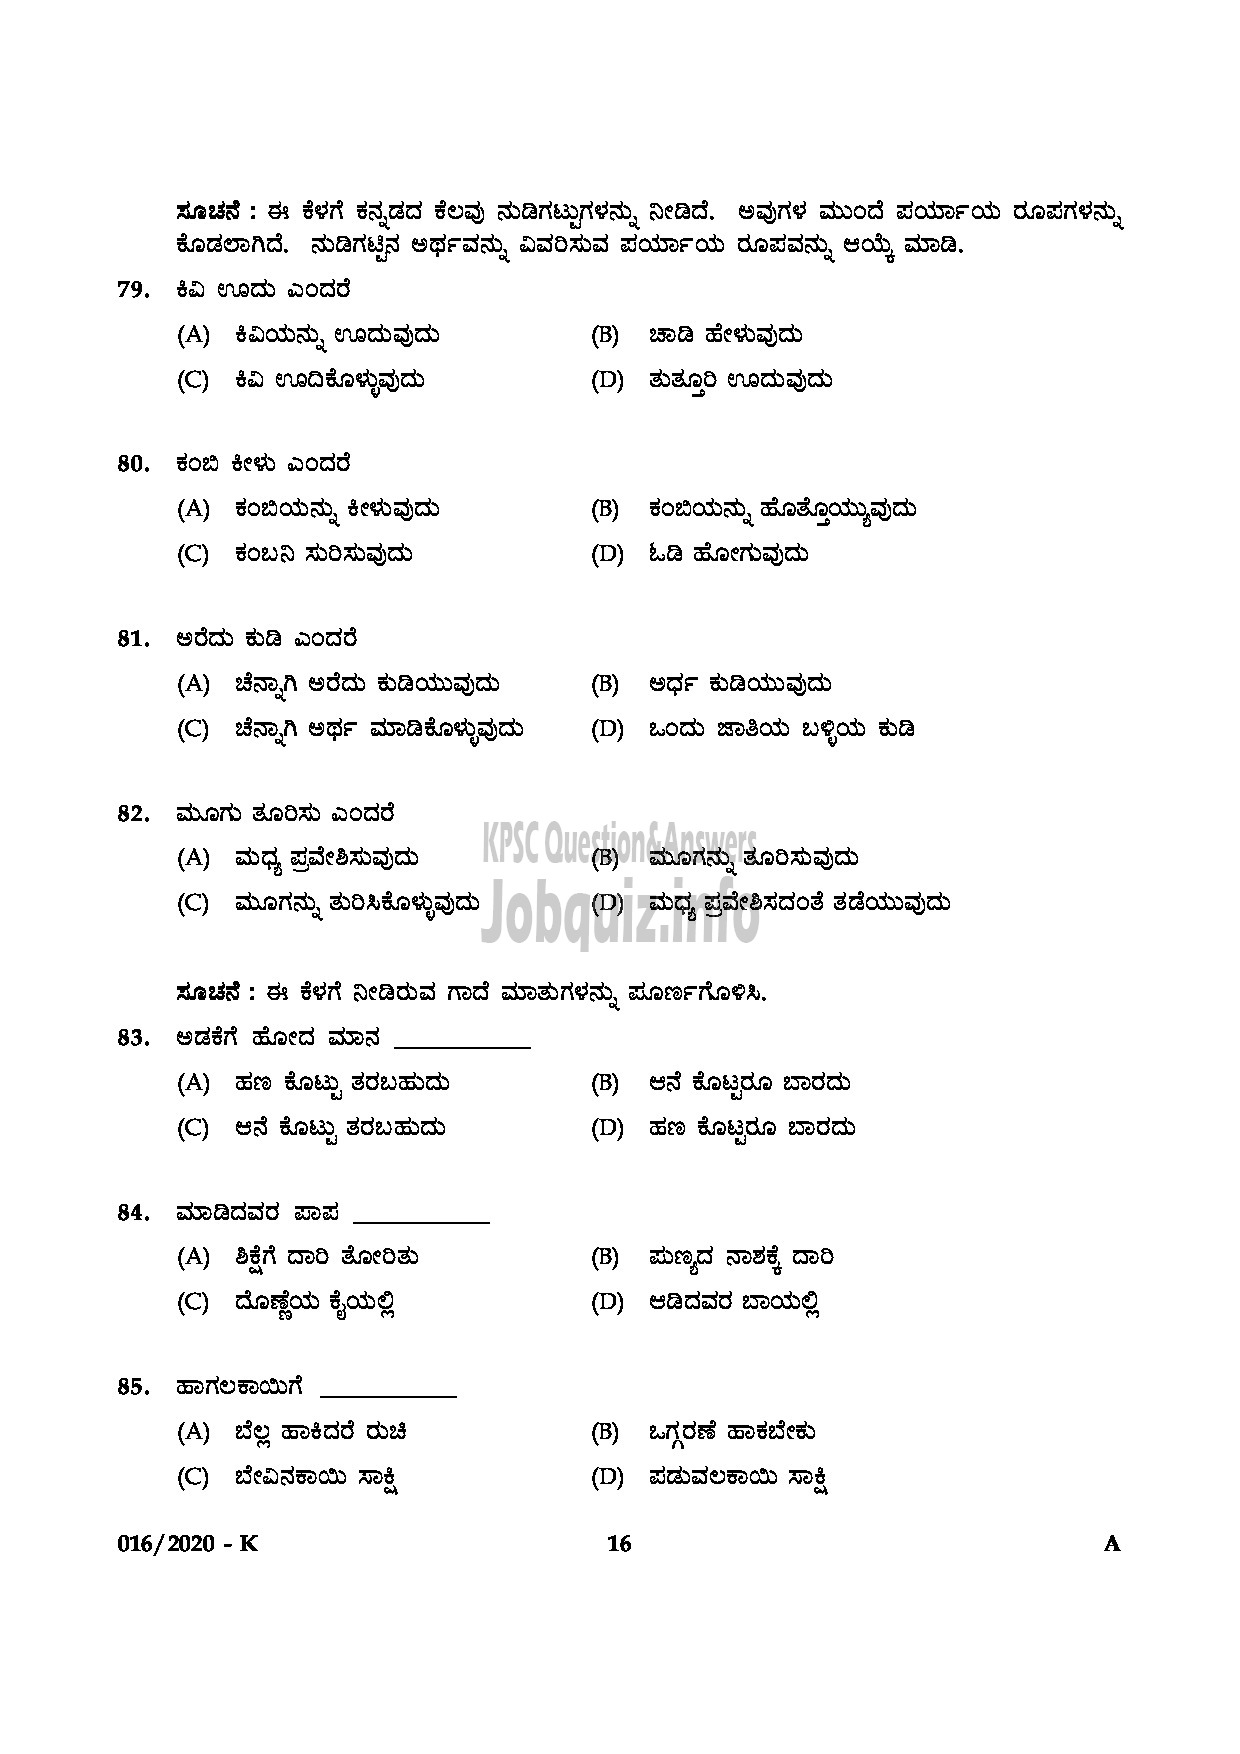 Kerala PSC Question Paper - KAS OFFICER (JUNIOR TIME SCALE) TRAINEE KERALA ADMINISTRATIVE SERVICE ENGLISH / KANNADA-16